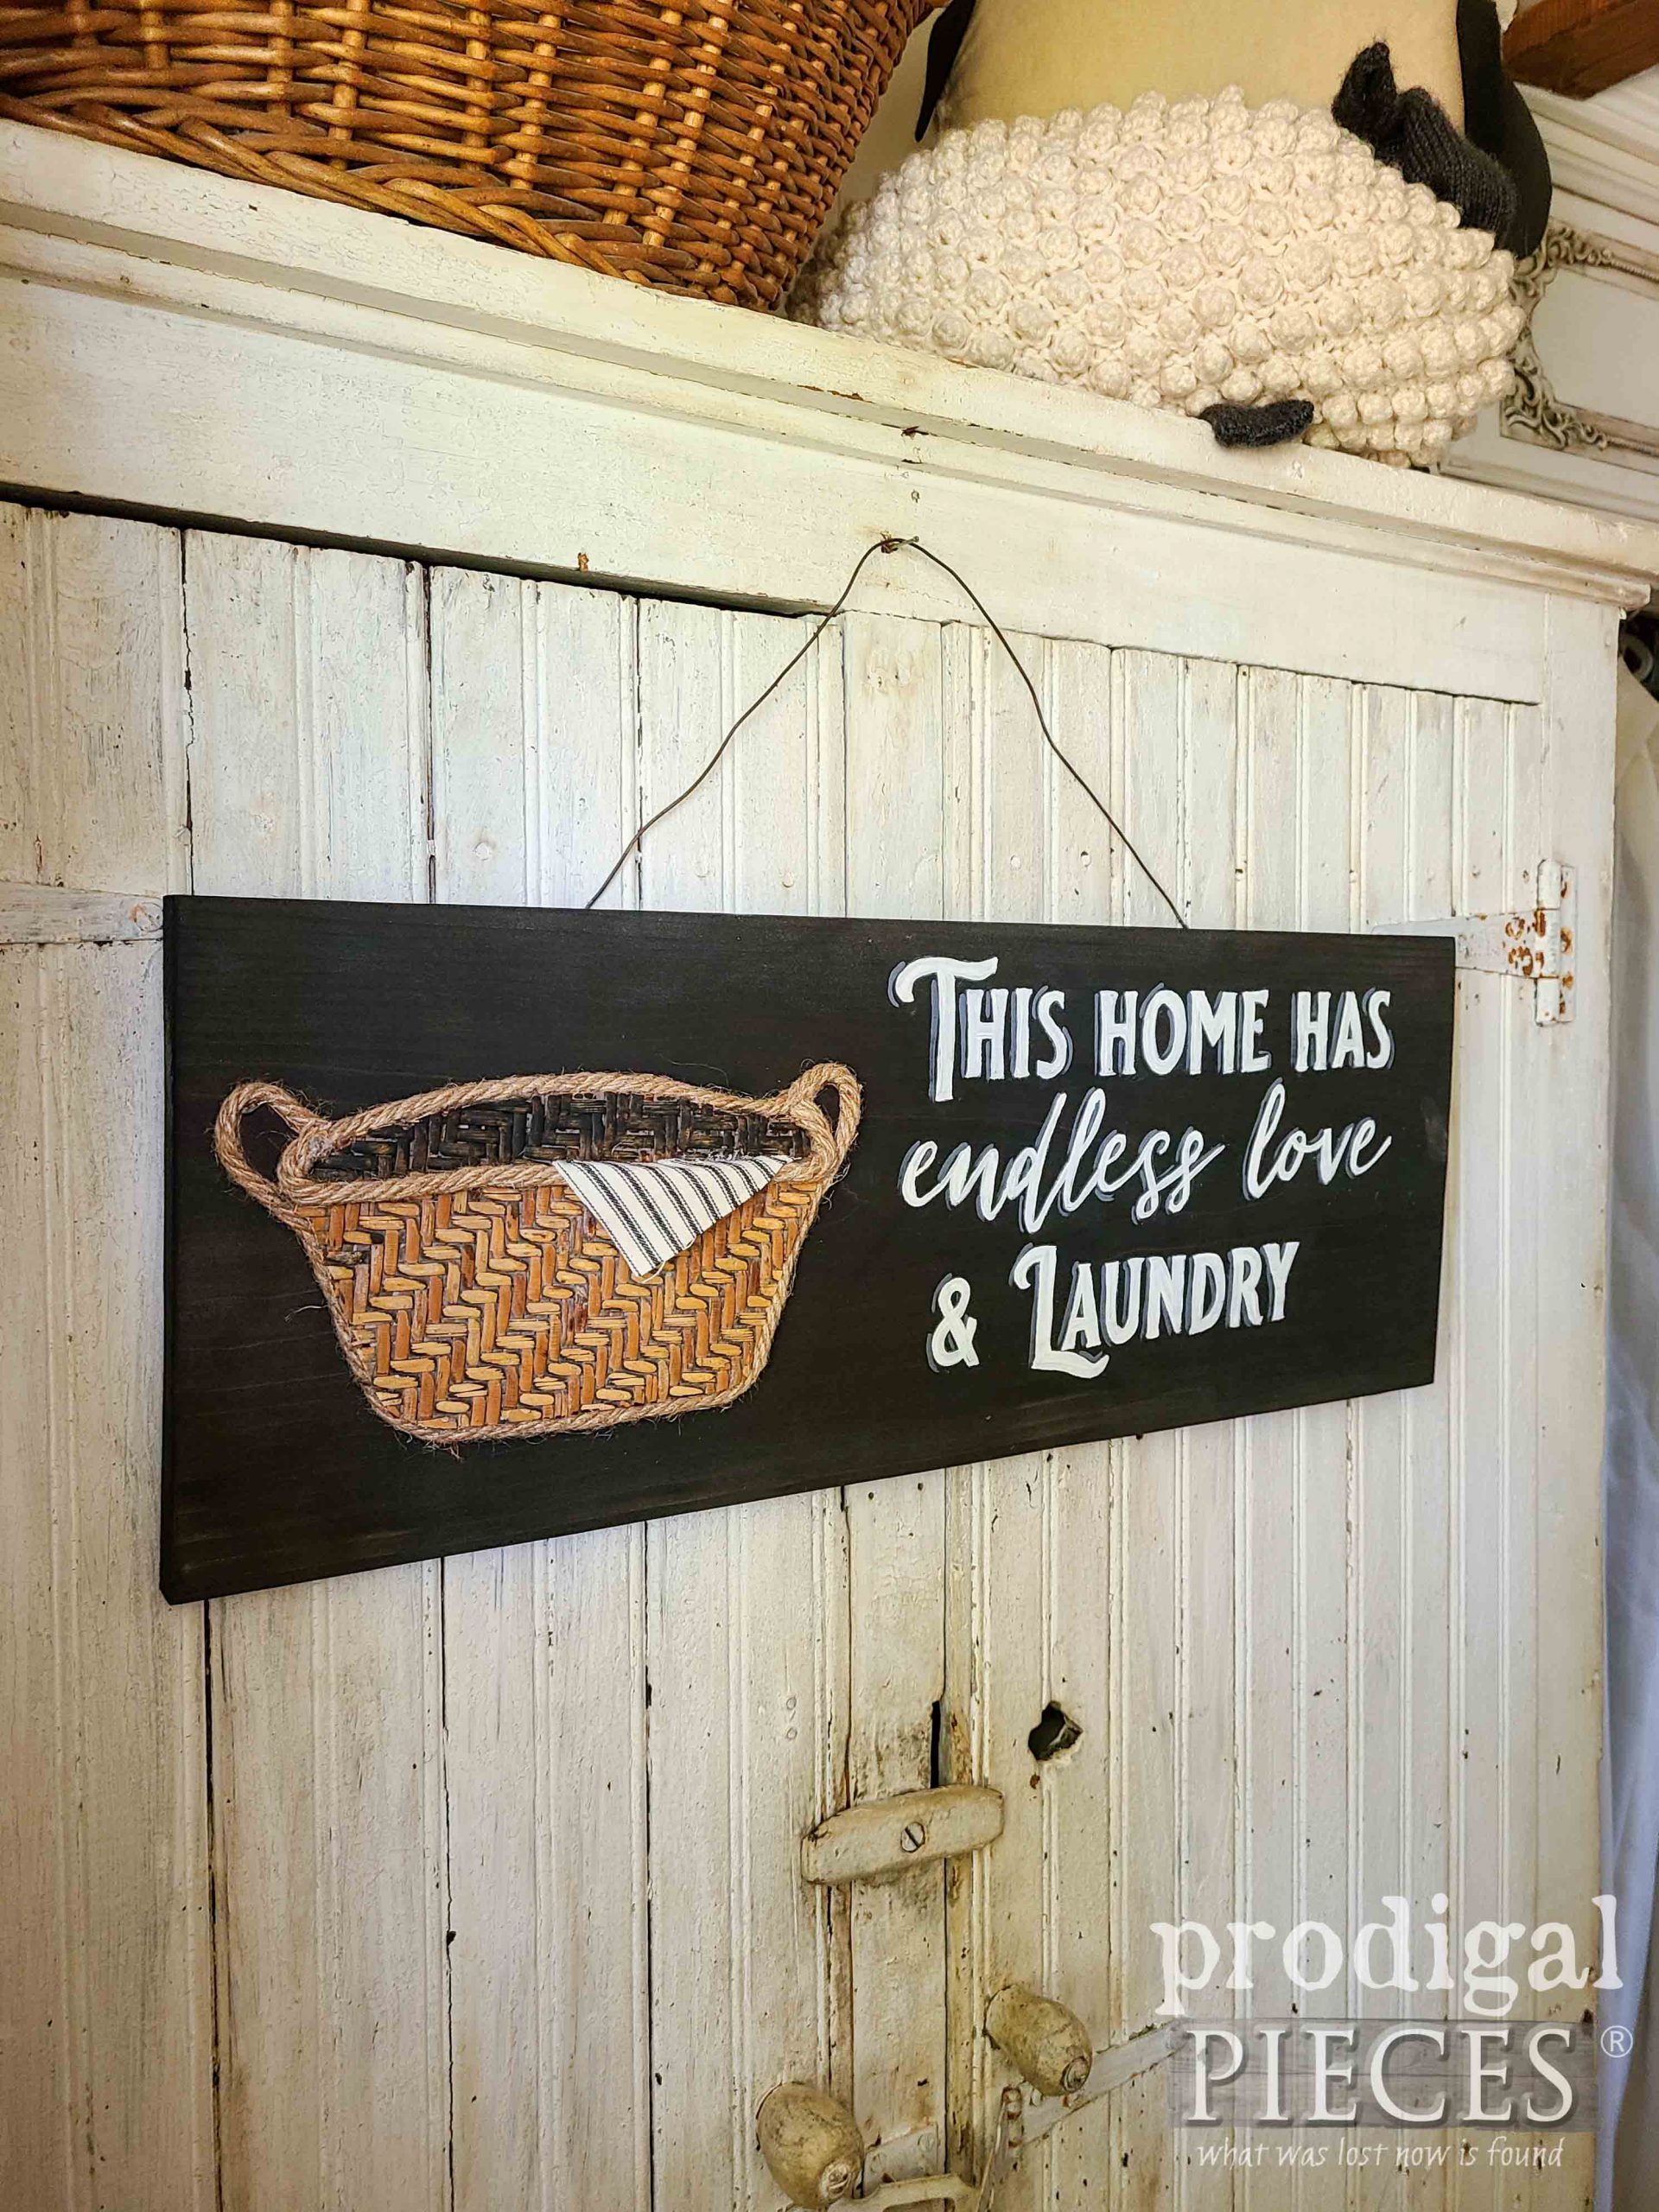 Handade DIY Laundry Wall Sign for Farmhouse Decor by Larissa of Prodigal Pieces | prodigalpieces.com #prodigalpieces #farmhouse #laundry